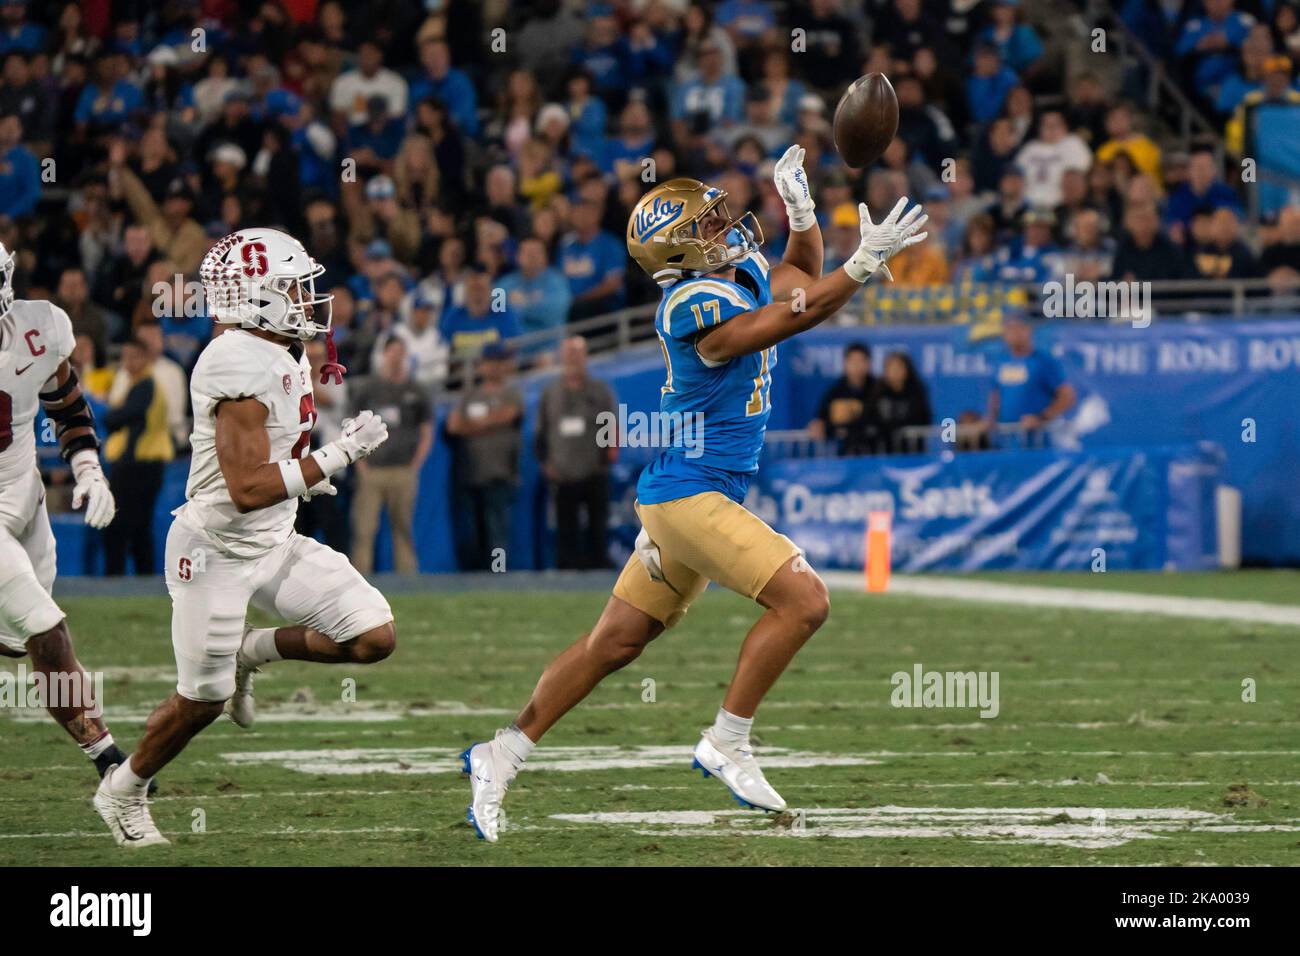 UCLA Bruins wide receiver Logan Loya (17) drops a catch during a NCAA football game against the Stanford Cardinal, Saturday, October 29, 2022, at the Stock Photo